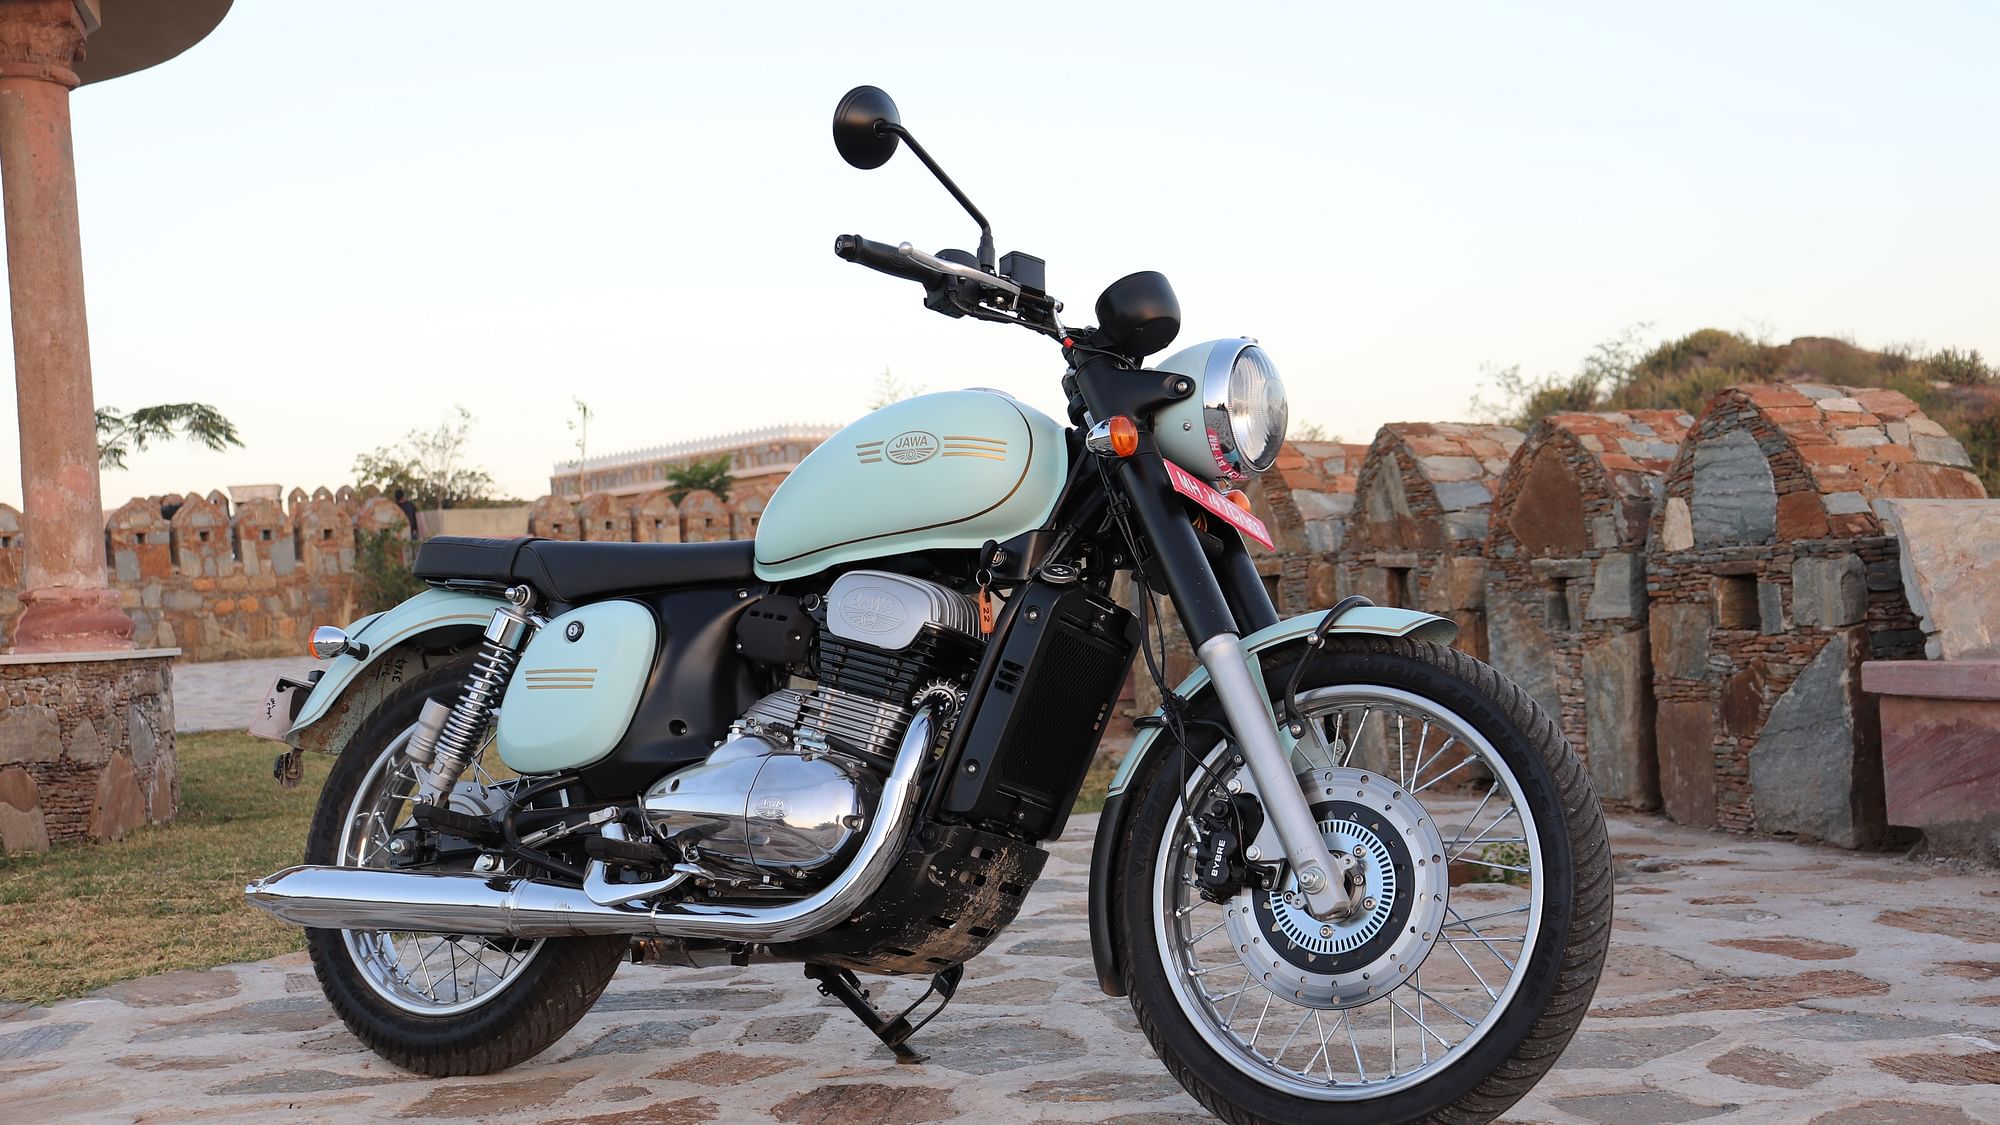 Jawa will now offer a dual-channel ABS option for Rs 8,942 extra on the Forty Two and Jawa models.&nbsp;